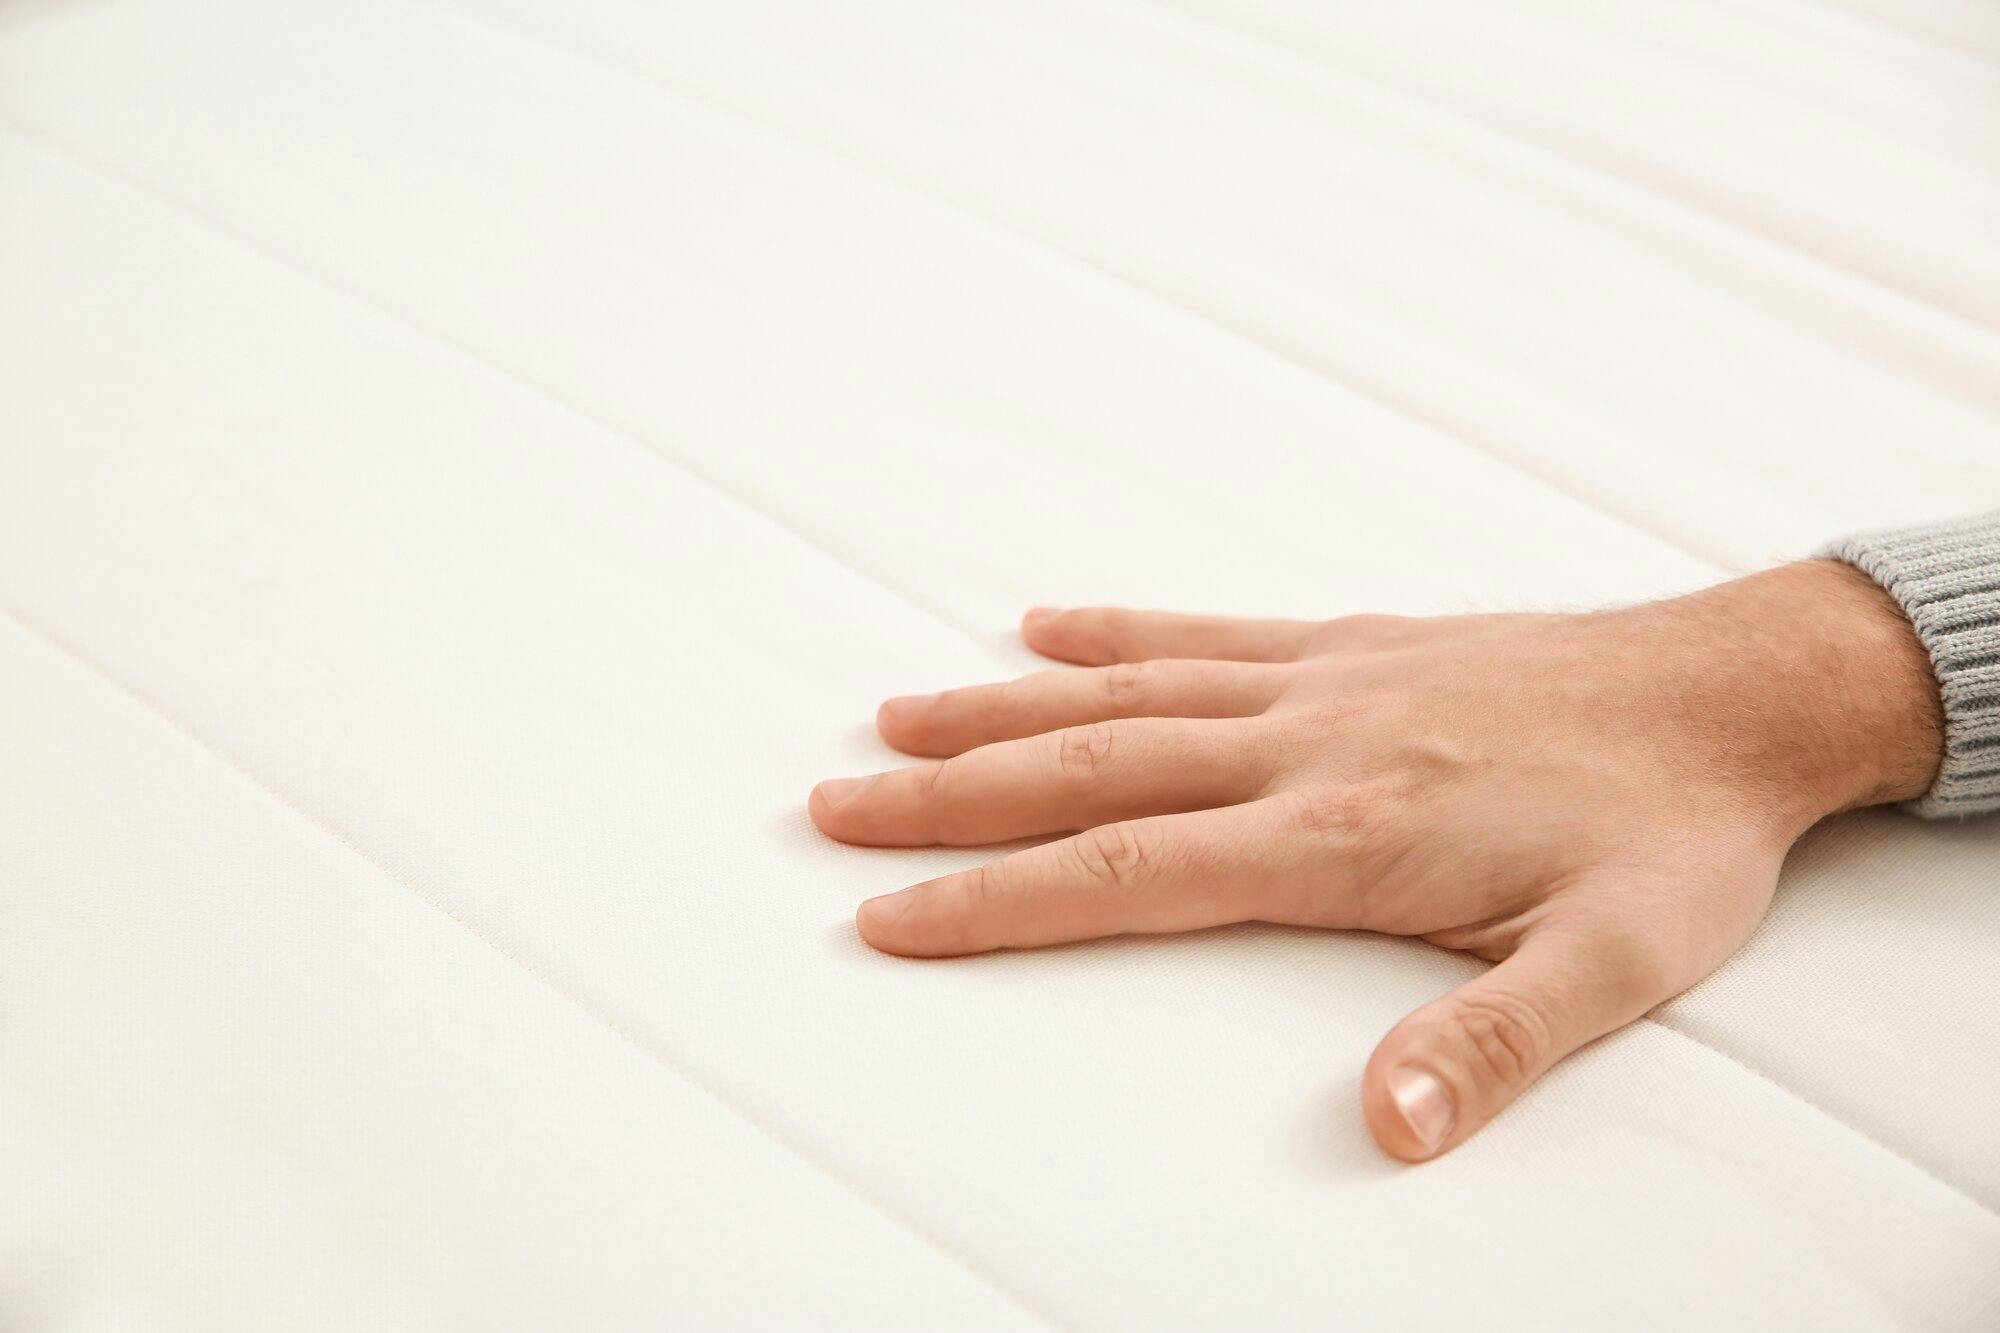 Man's hand pressing on a mattress to test its firmness level